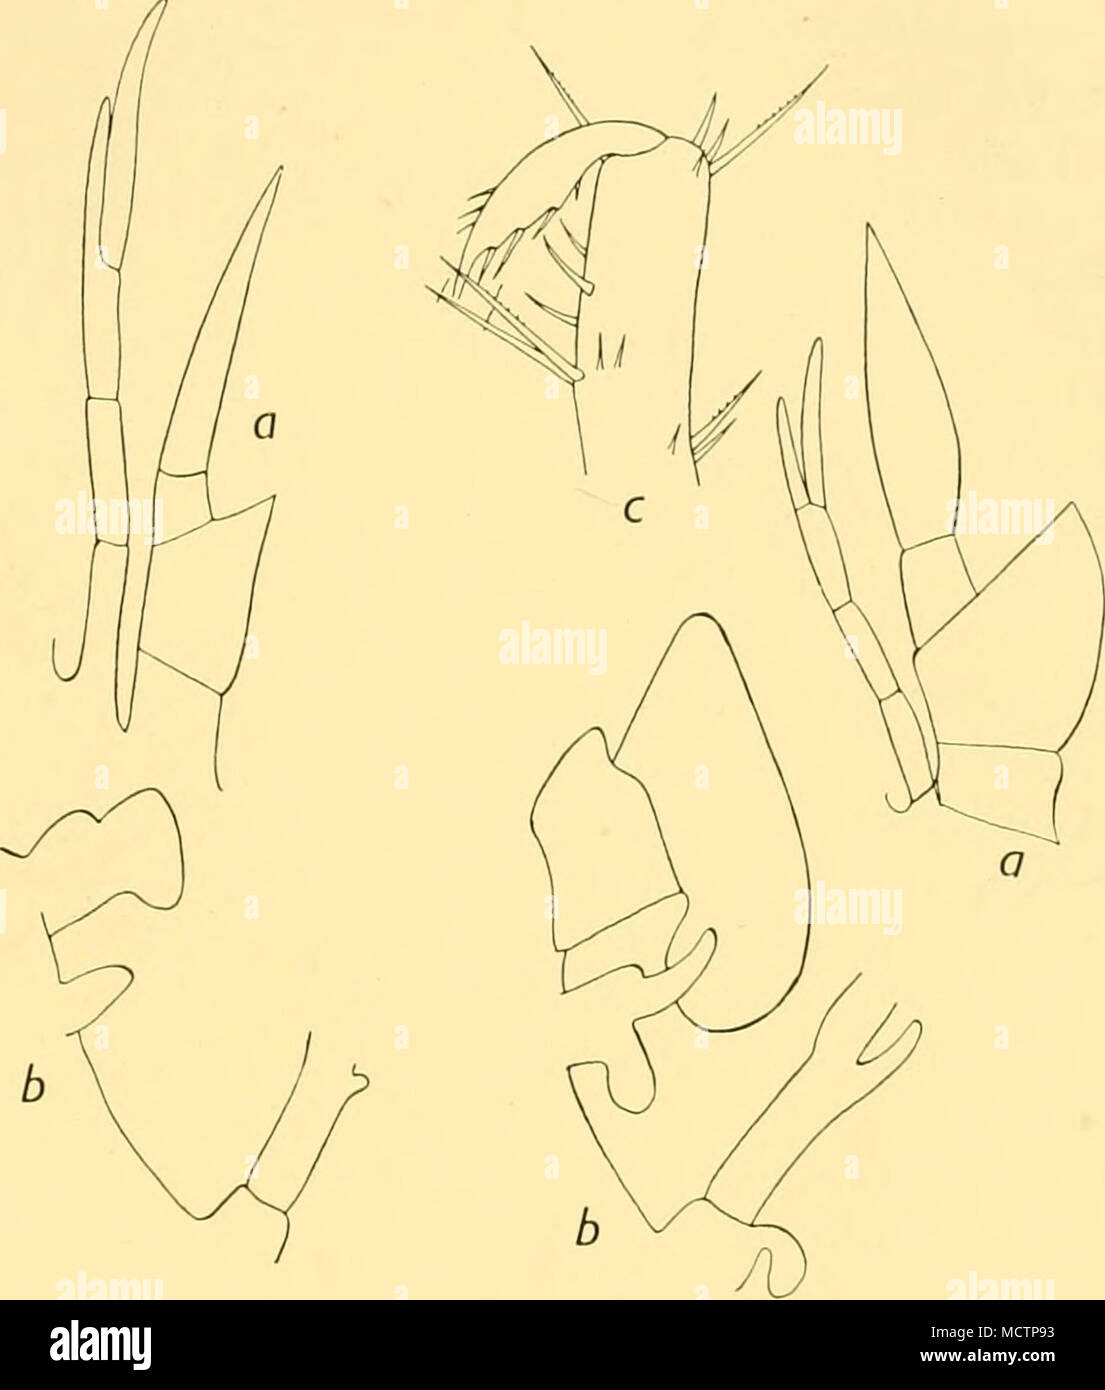 . Stage VIII? Stage IX? Fig. 41. Thetius sp.?, Stages VIII-IX?. a. Antennae. b. Maxilla, etc. c. End of leg i, Stage IV?. Maxillule without palp. Maxilla without setae, not widened in any known speci- mens. Maxillipedes 2 and 3 without exopod. Leg 5 fully developed, with setose exopod (in all known specimens), and seated at a distance from abdomen. Pleopods and uropods greatly delayed in appearance. Only three specimens of this Phyllosoma were taken by the 'Discovery II', at the following stations: St. 691. 0° 25'S, 29° 56'V/. One, 15 mm. St. 1576. 14° 42' S, 42&quot; z2' E. One, 20 mm. St. 15 Stock Photo